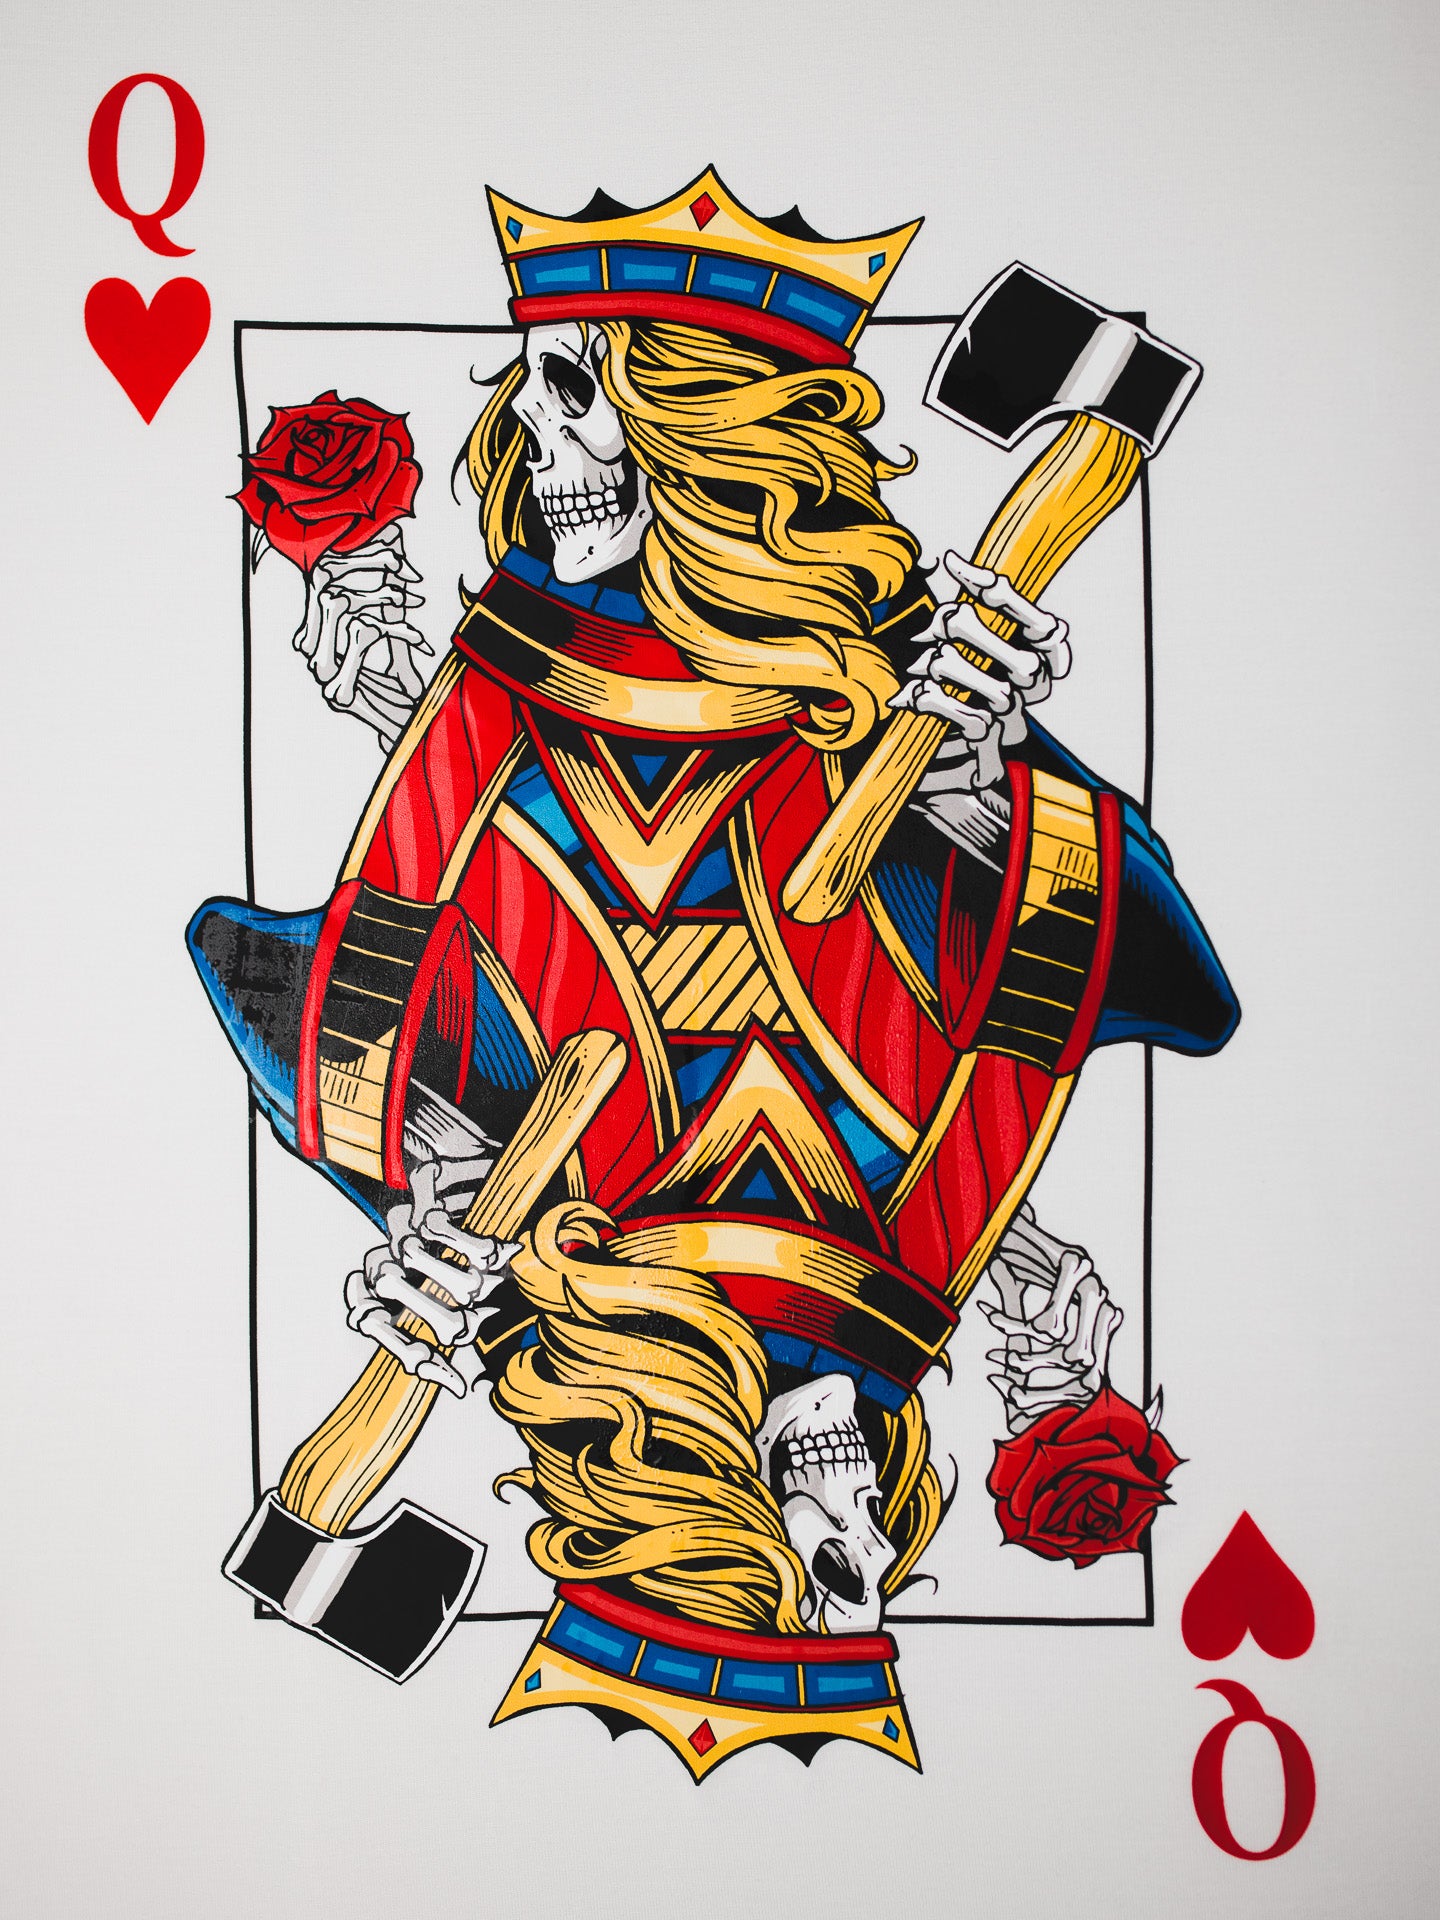 Queen of Hearts T-Shirt (Bamboo Ice Blend)